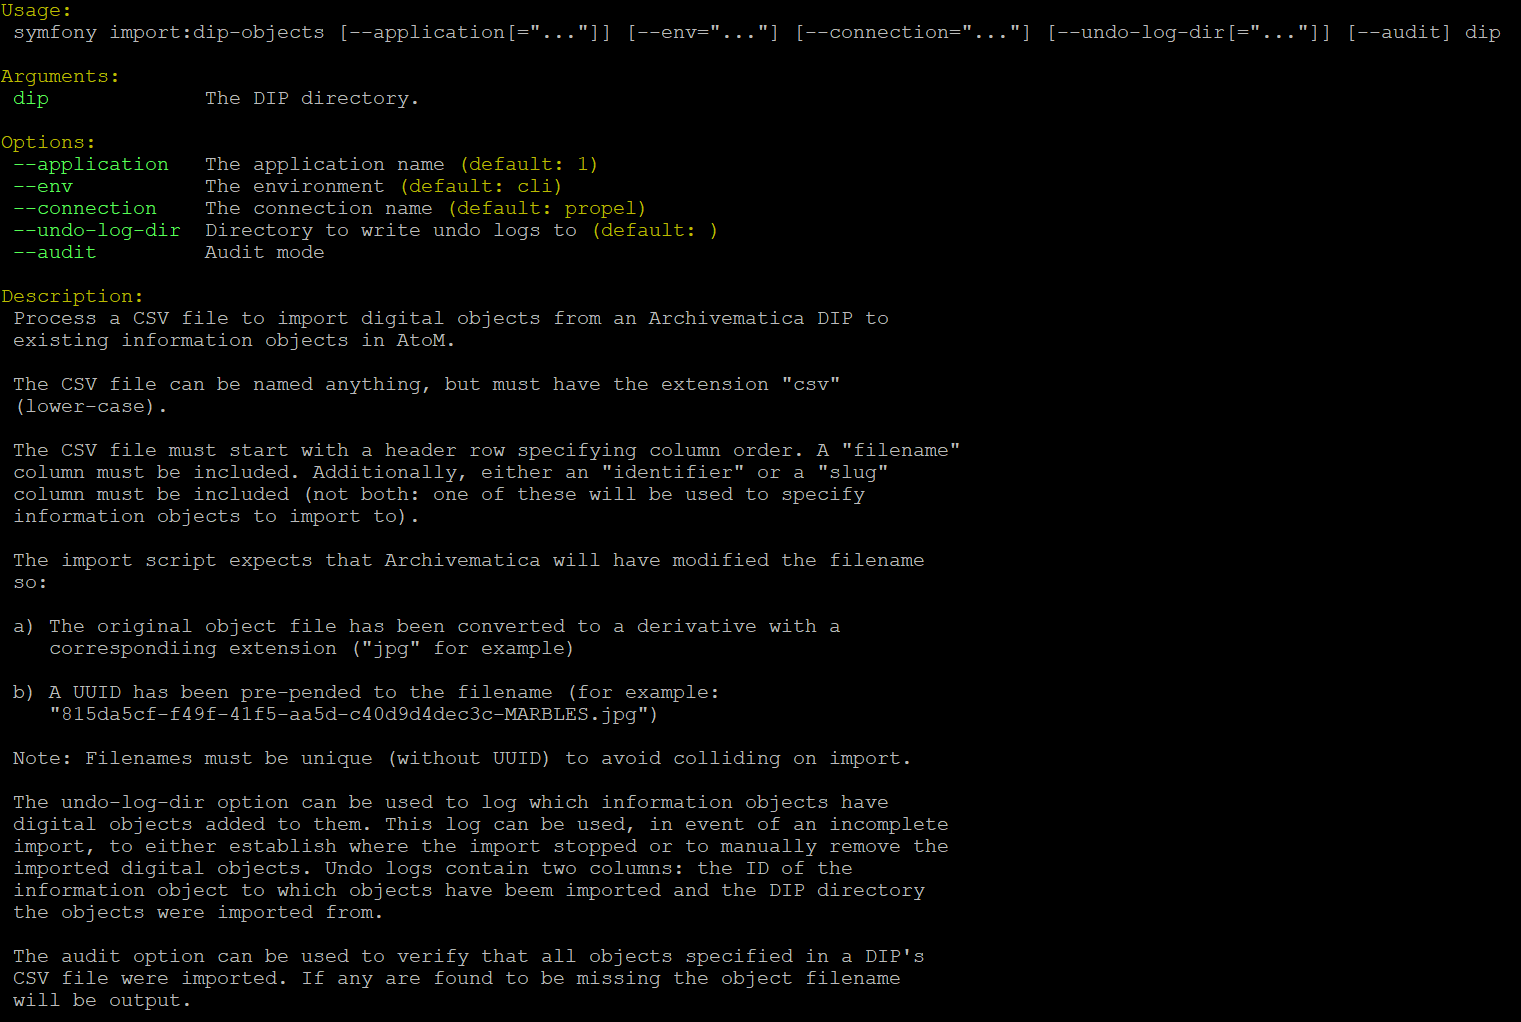 An image of the help page for the DIP object import CLI tool